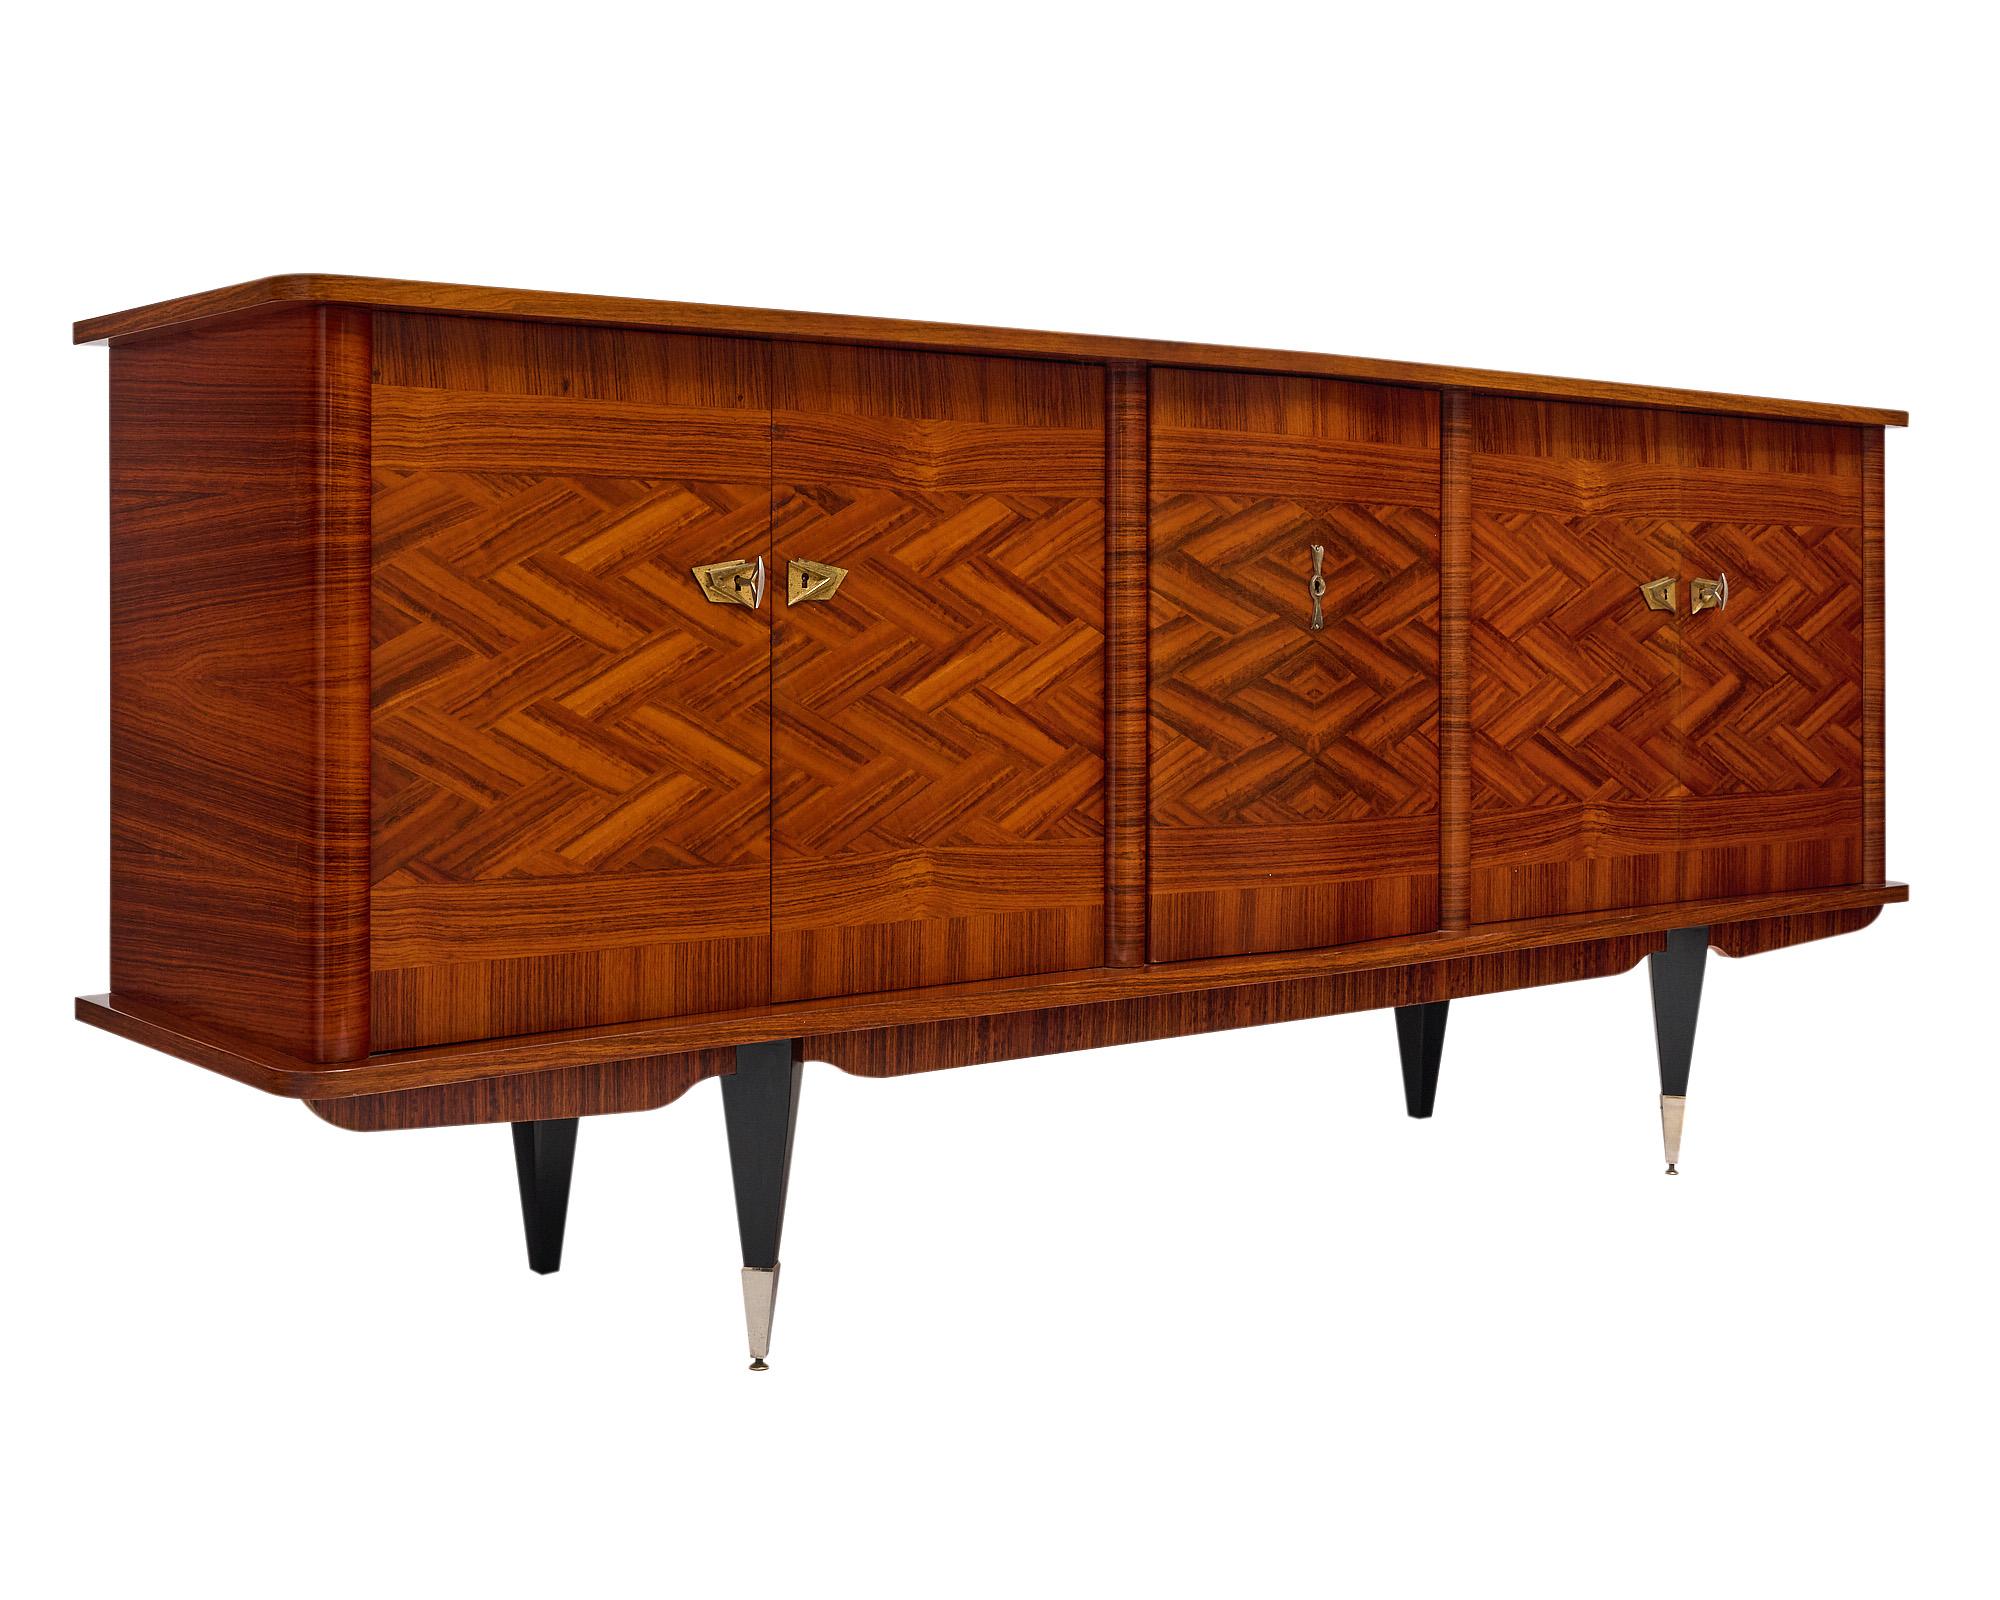 Buffet from France in the mid-century style. The enfilade features an eye-catching rosewood veneer in a woven pattern. There are two sets of doors that open to reveal a lemon wood interior with shelving and dovetailed drawers. The center panel opens